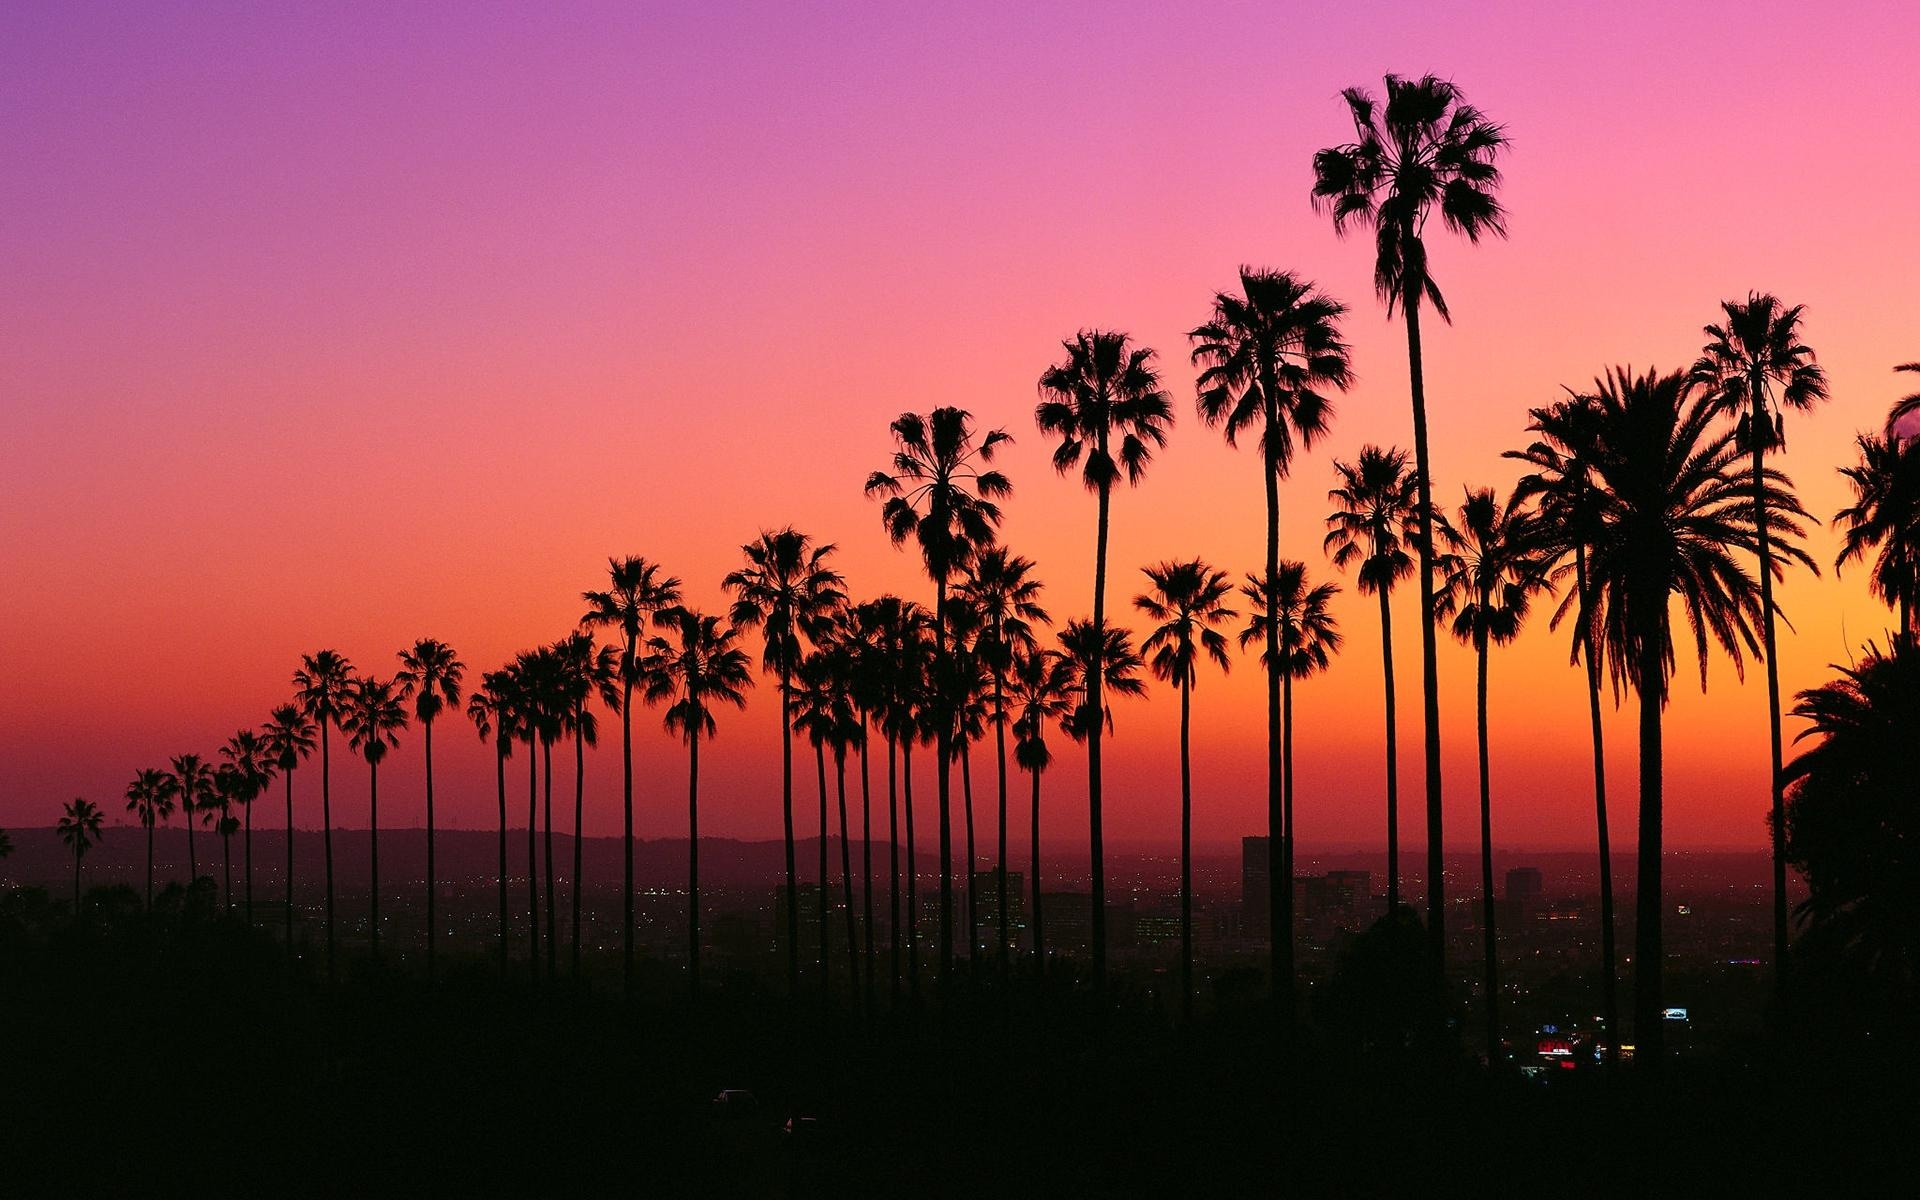 Los Angeles: City of Angels, Aesthetic, Sunset. 1920x1200 HD Wallpaper.